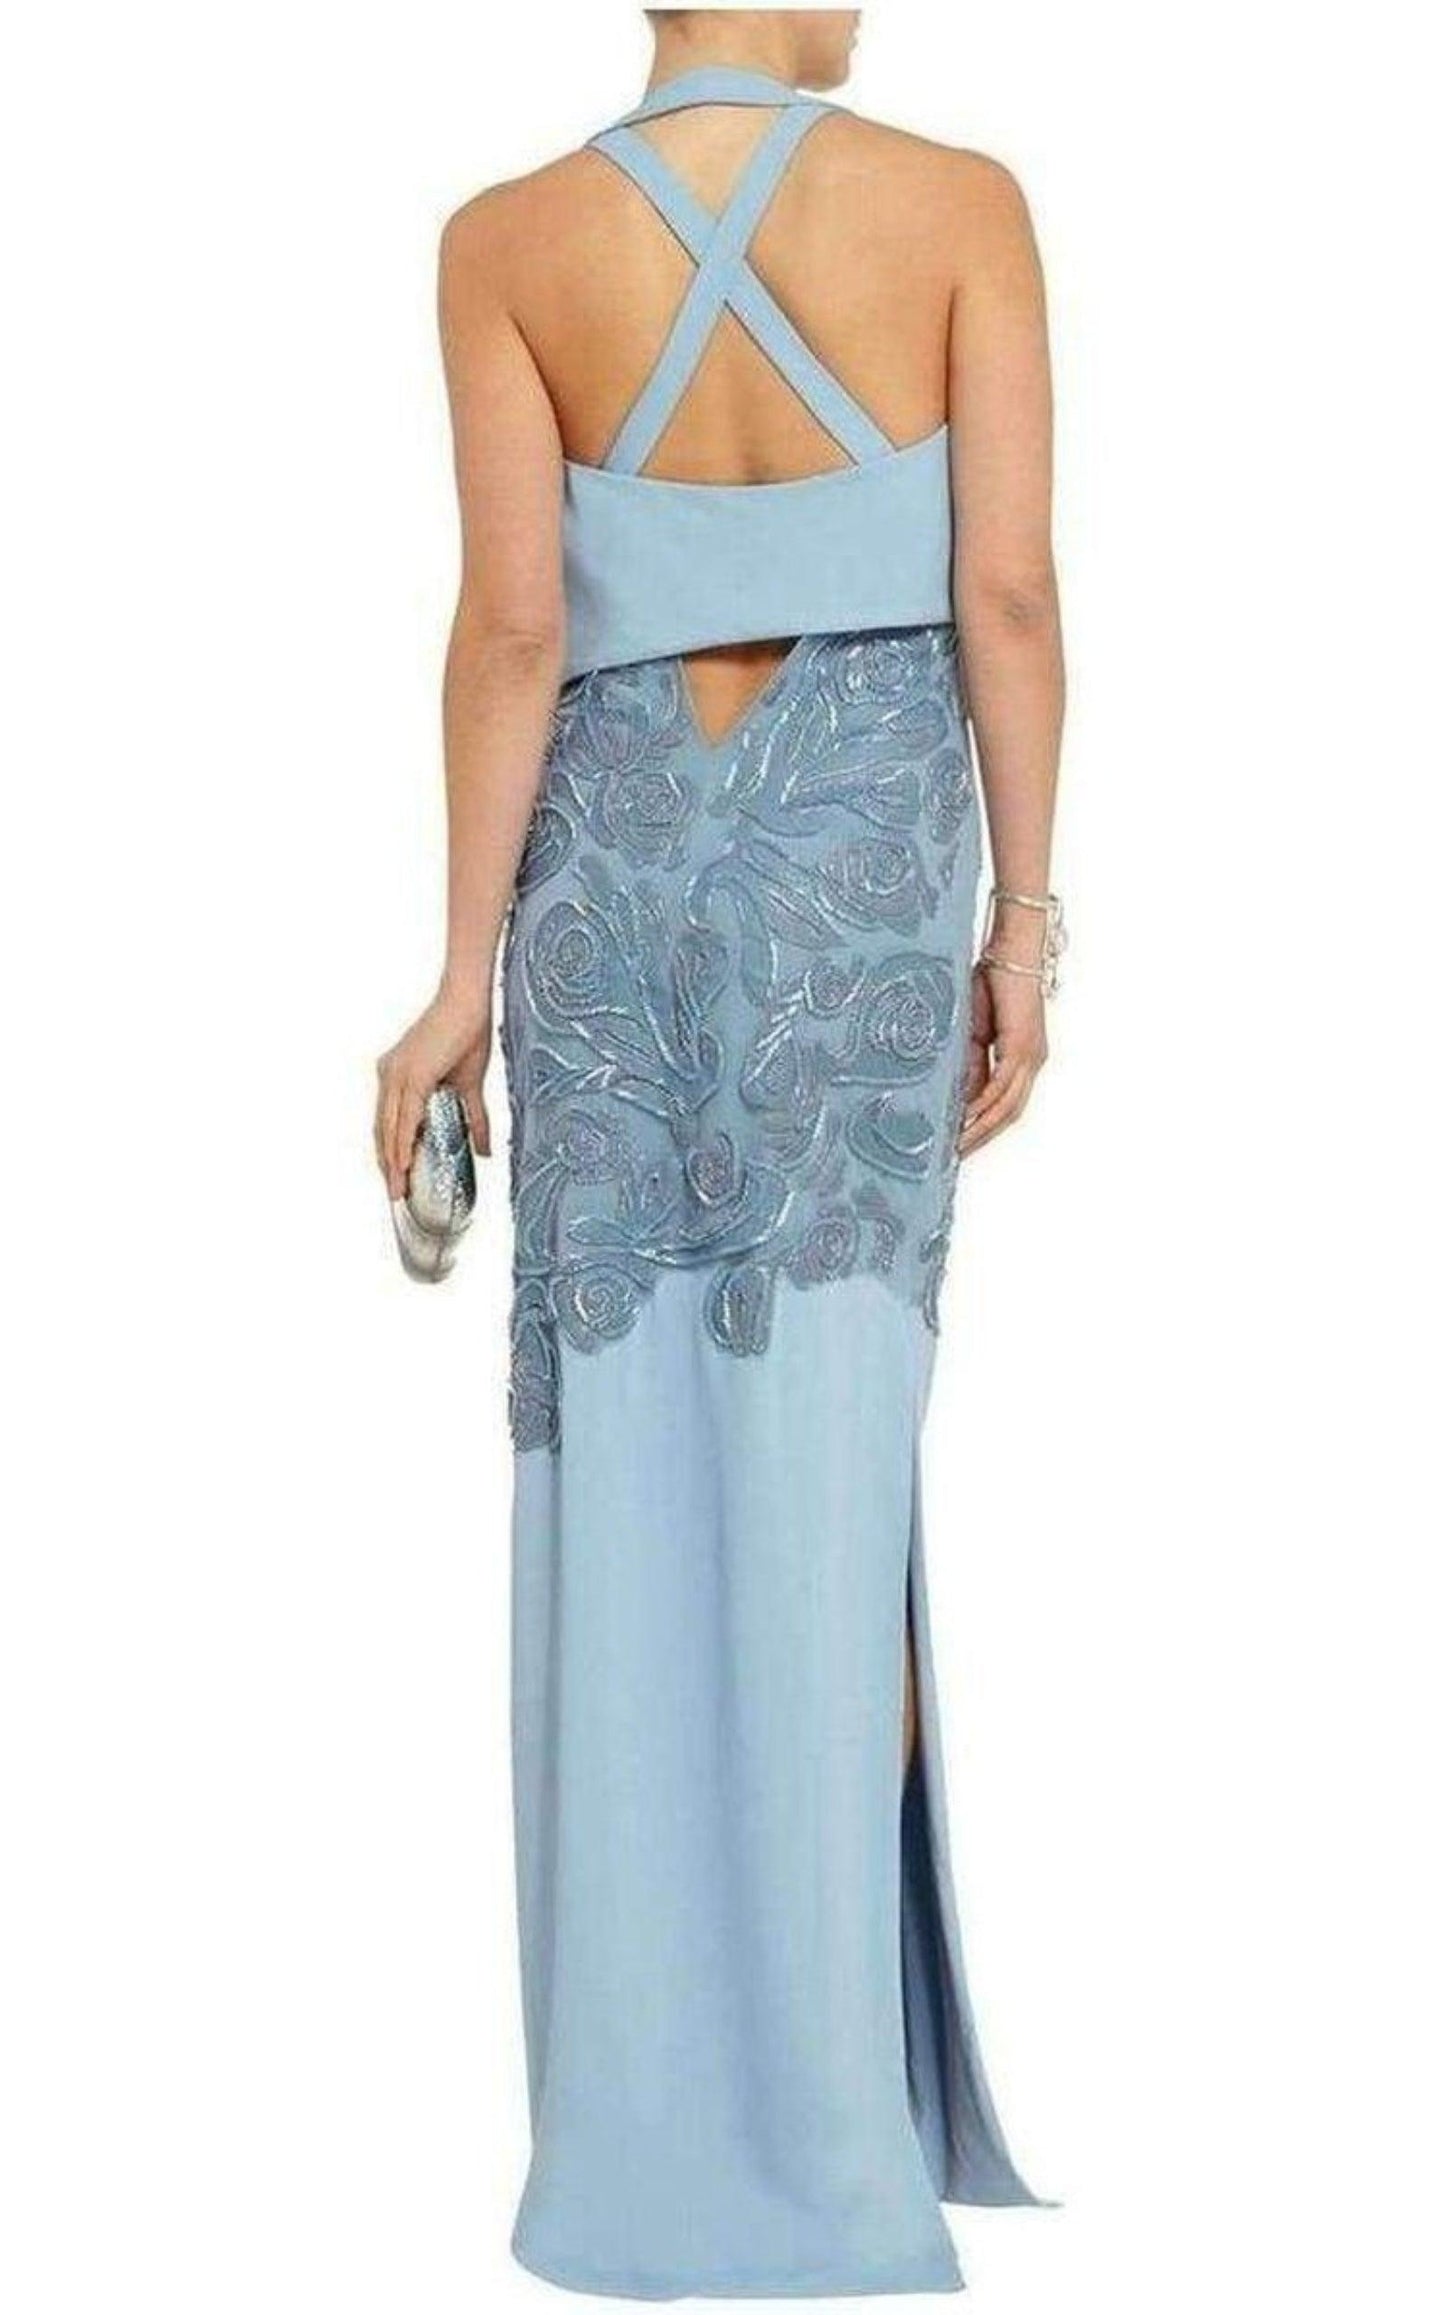  VersaceBlue Leather Cutout Lace Embellished Gown - Runway Catalog